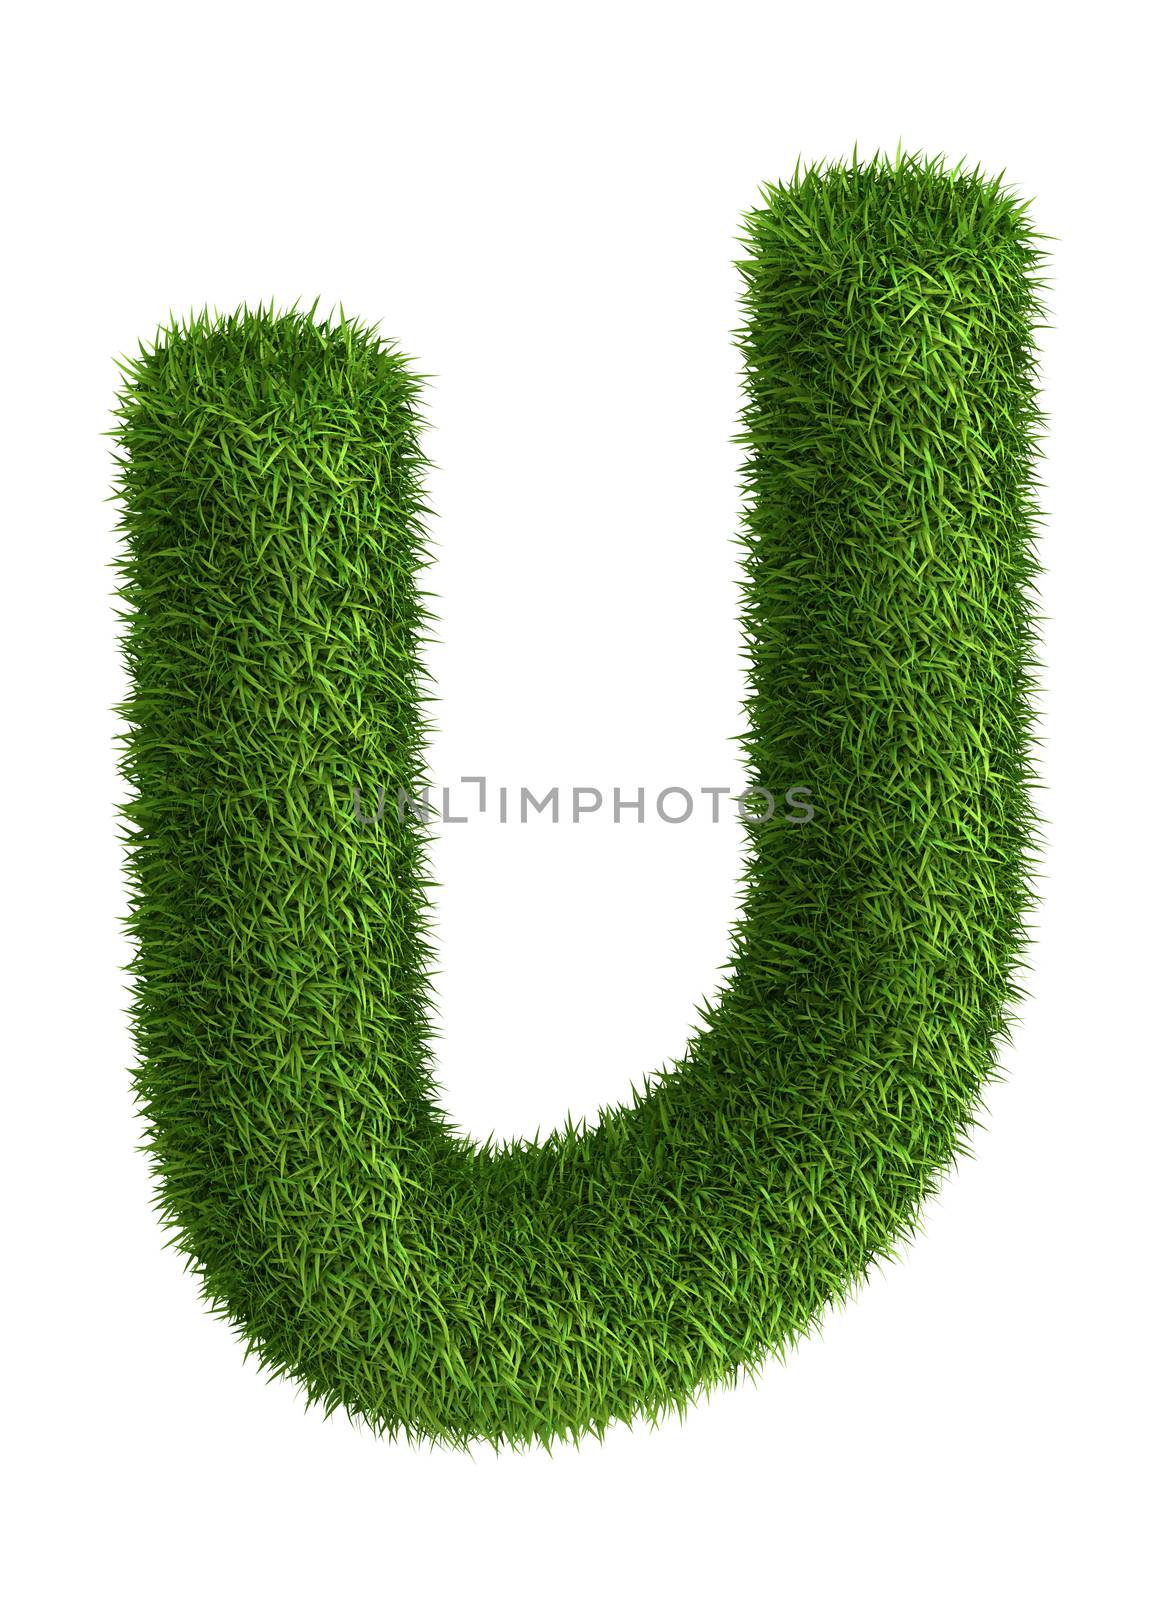 3D Letter U photo realistic isometric projection grass ecology theme on white